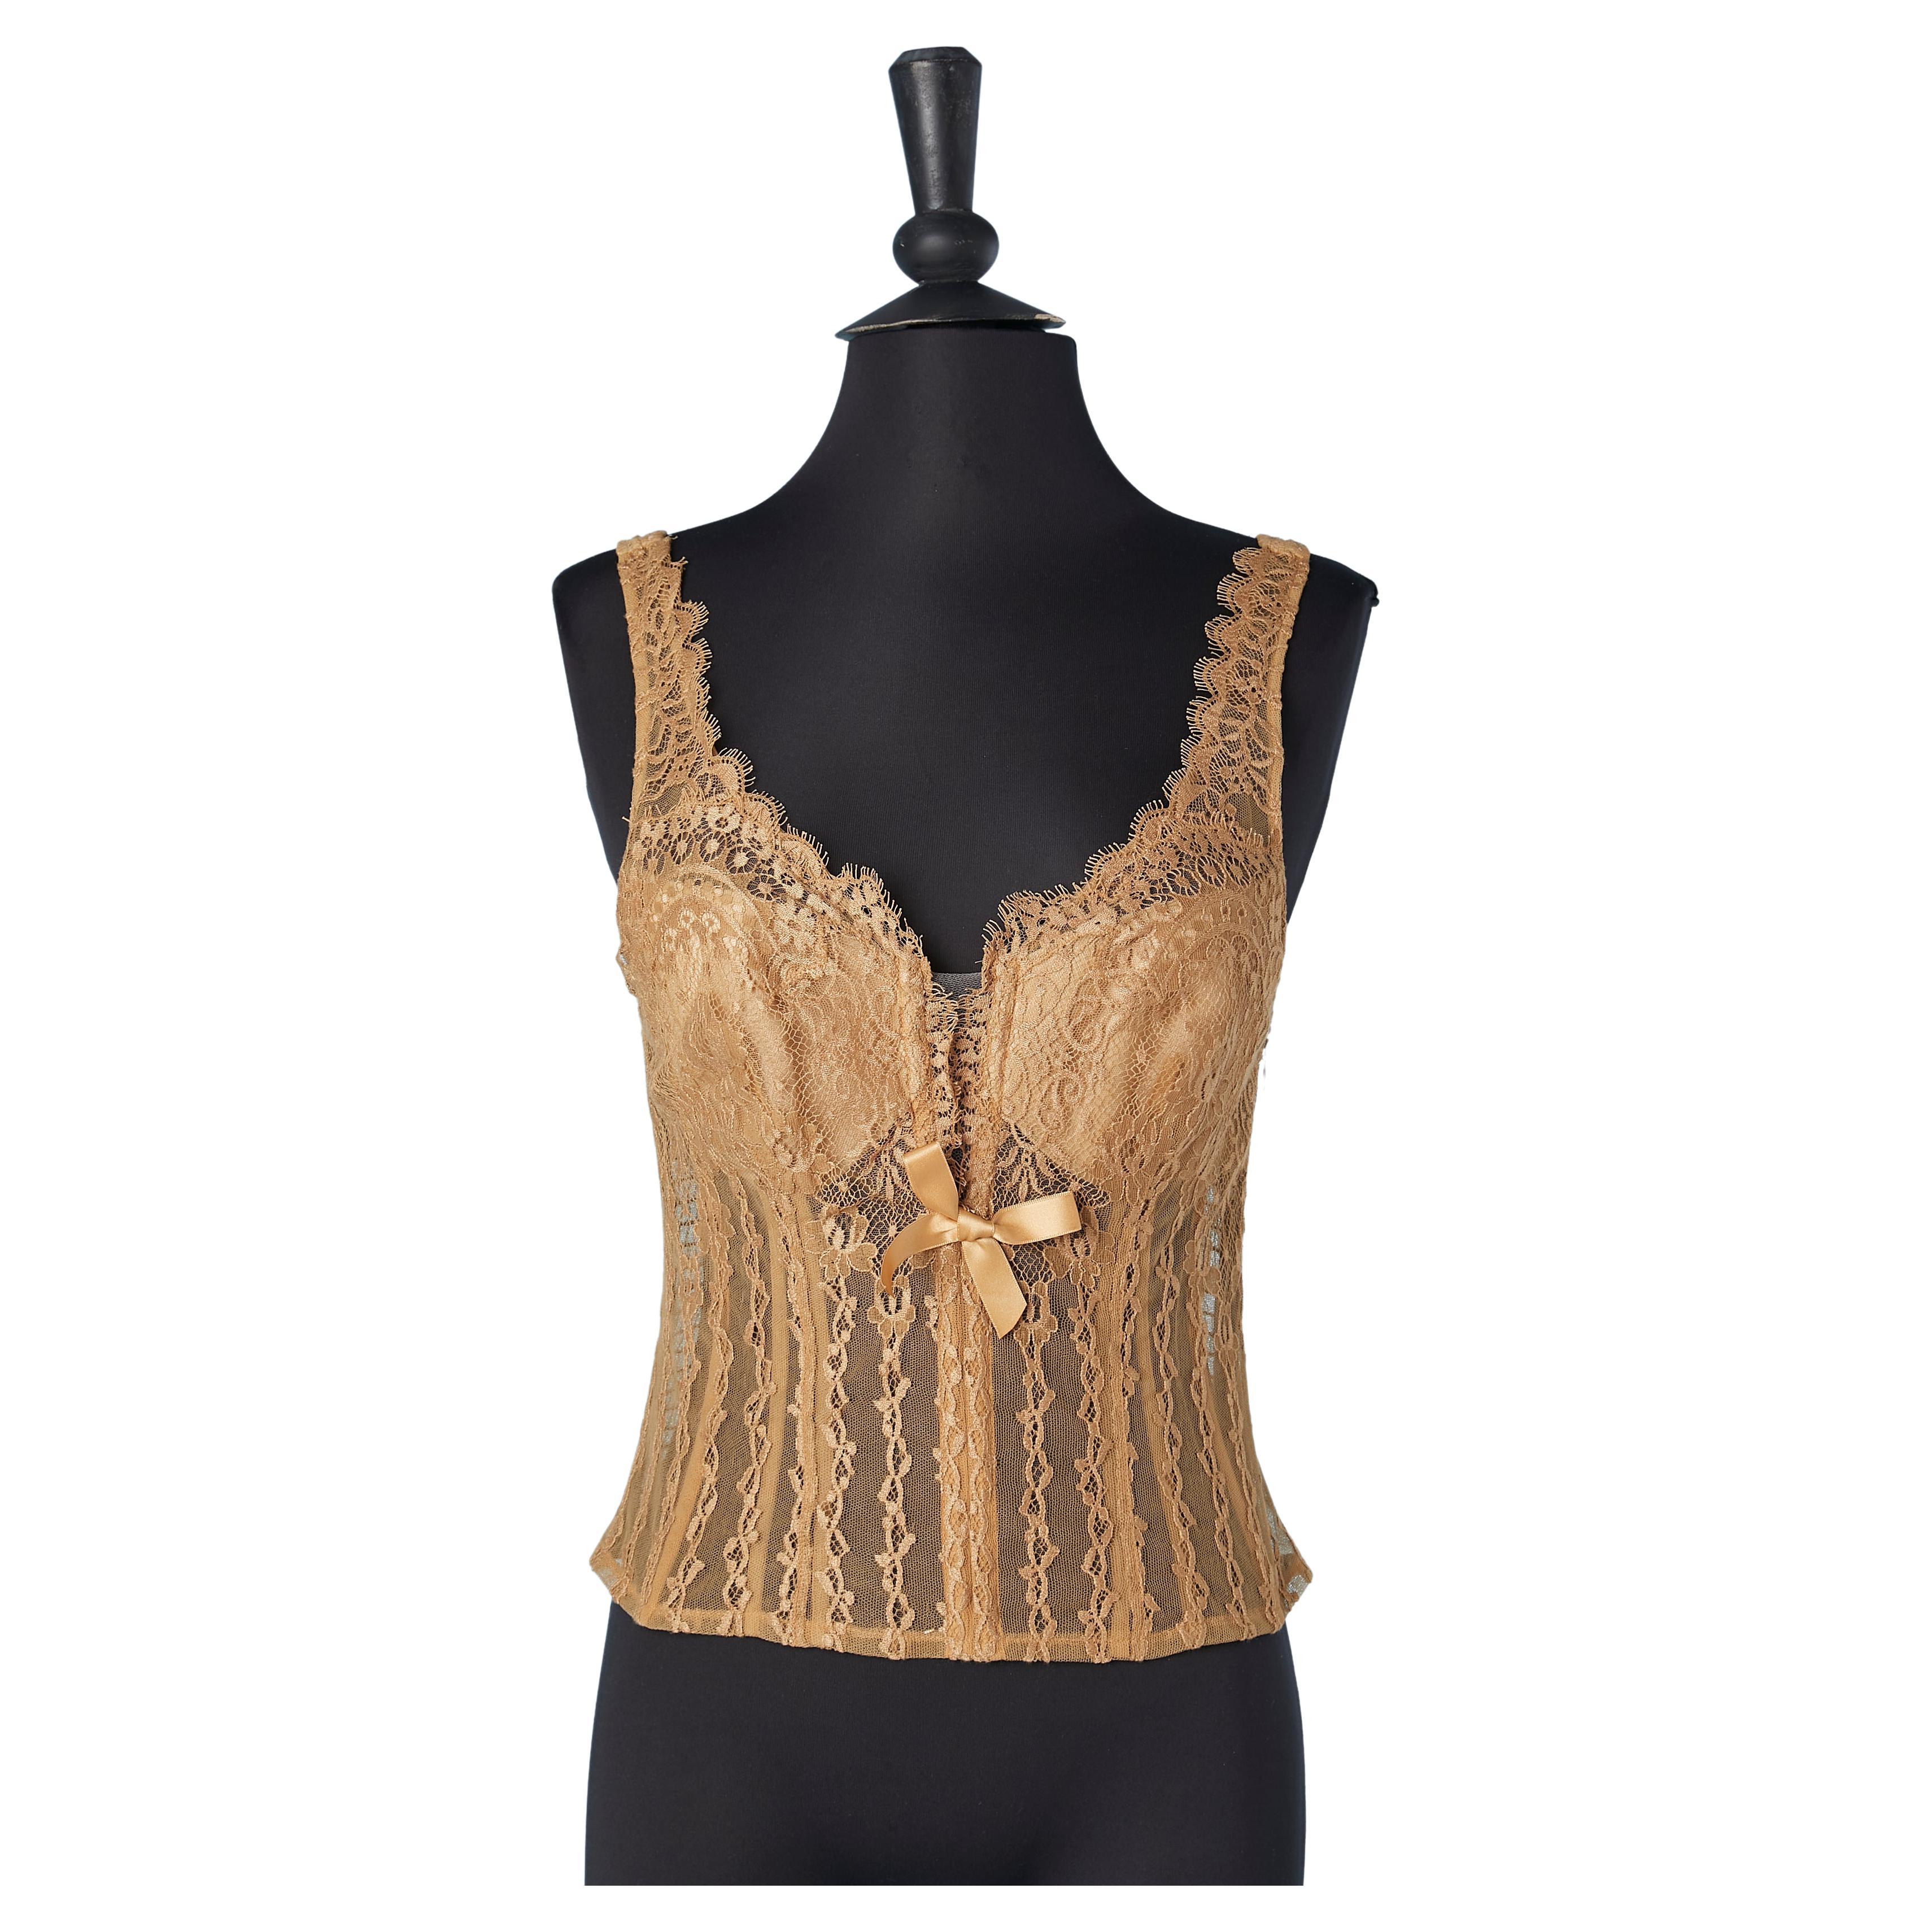 Beige lace lace bustier with boned and padded Marvel by La Perla 